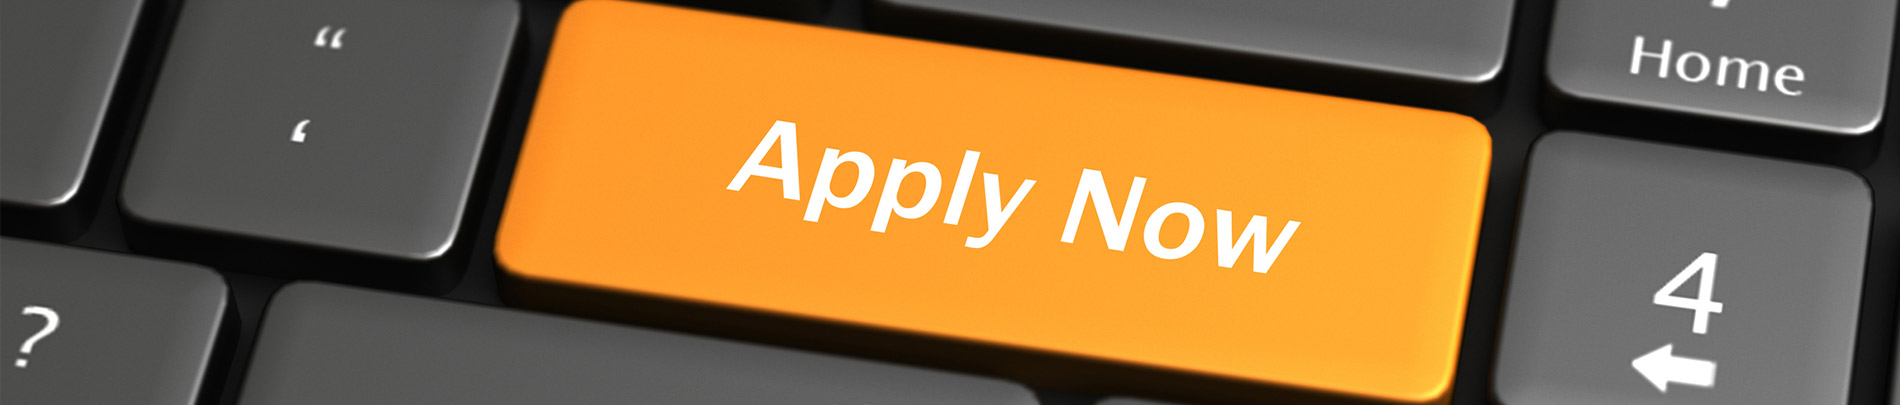 image of an "apply now" button